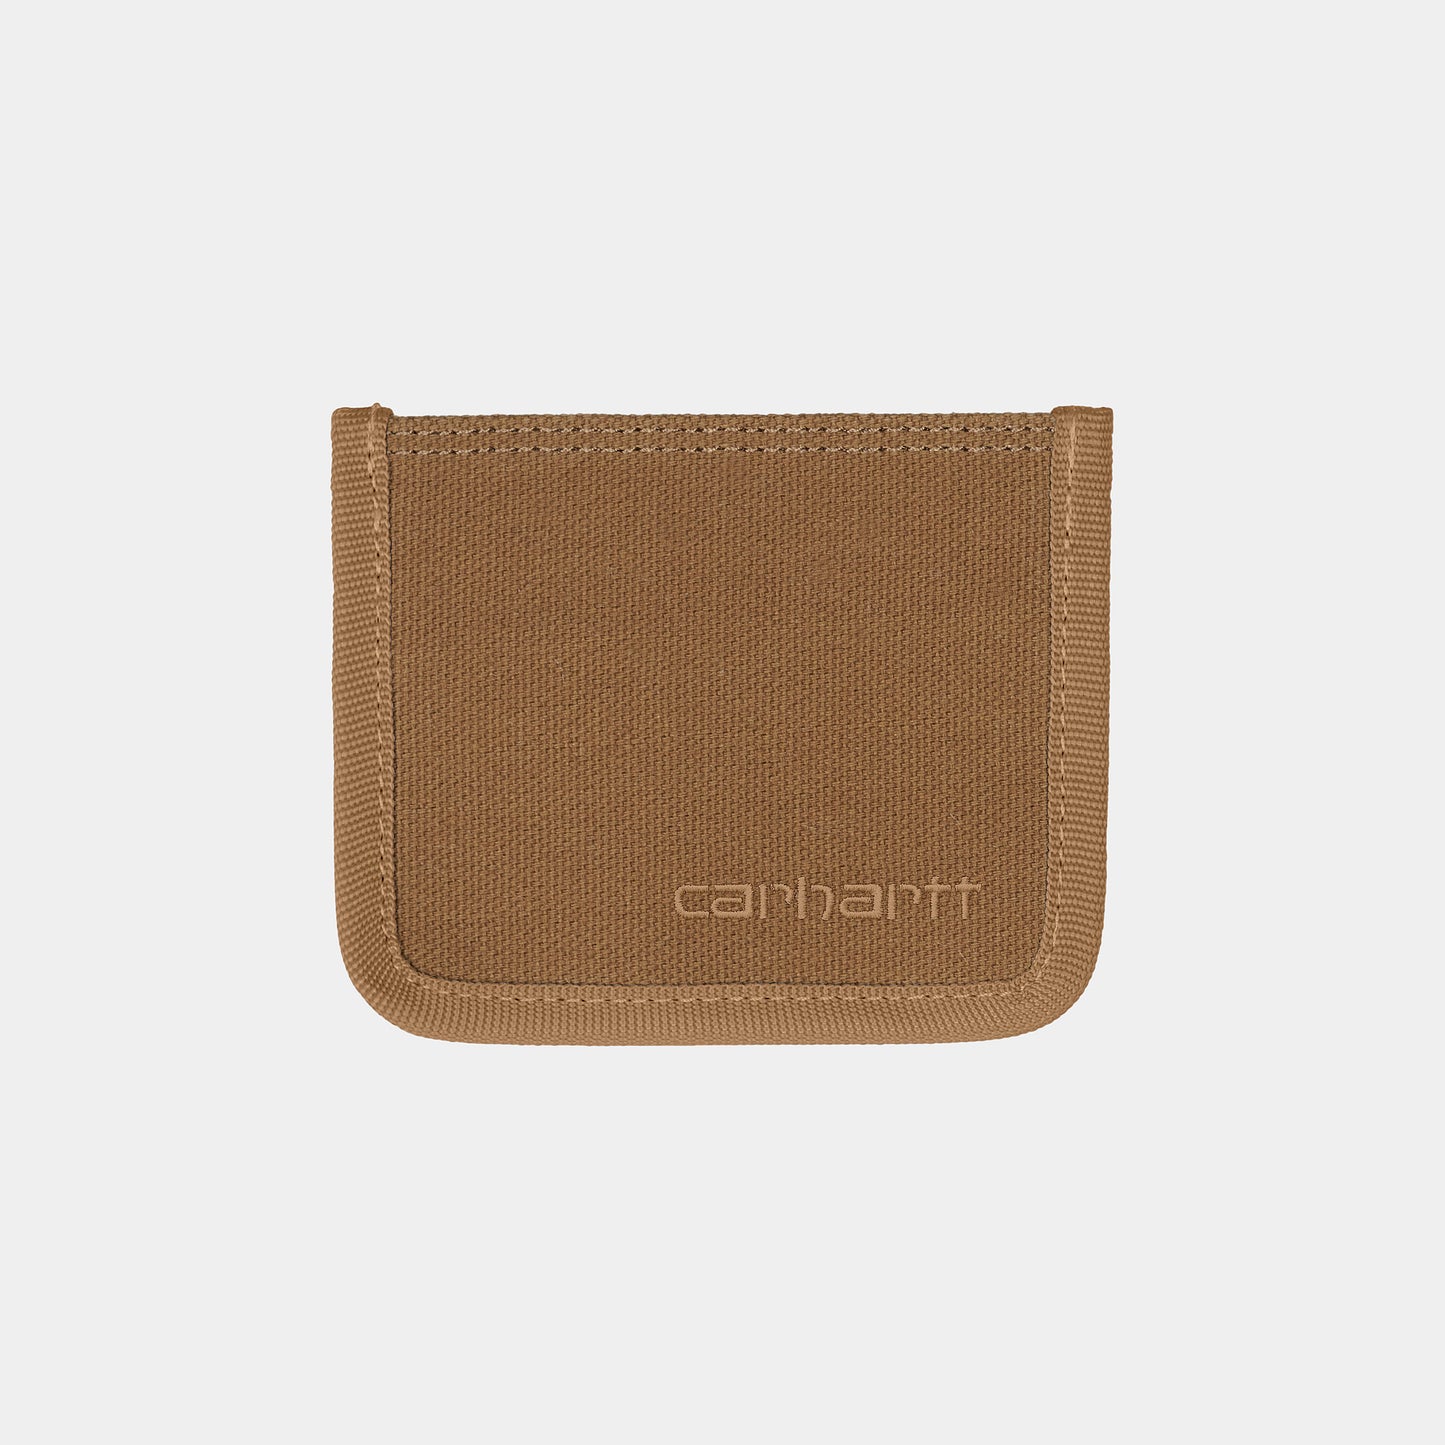 CARHARTT WIP CARSTON CARDHOLDER - deviceone